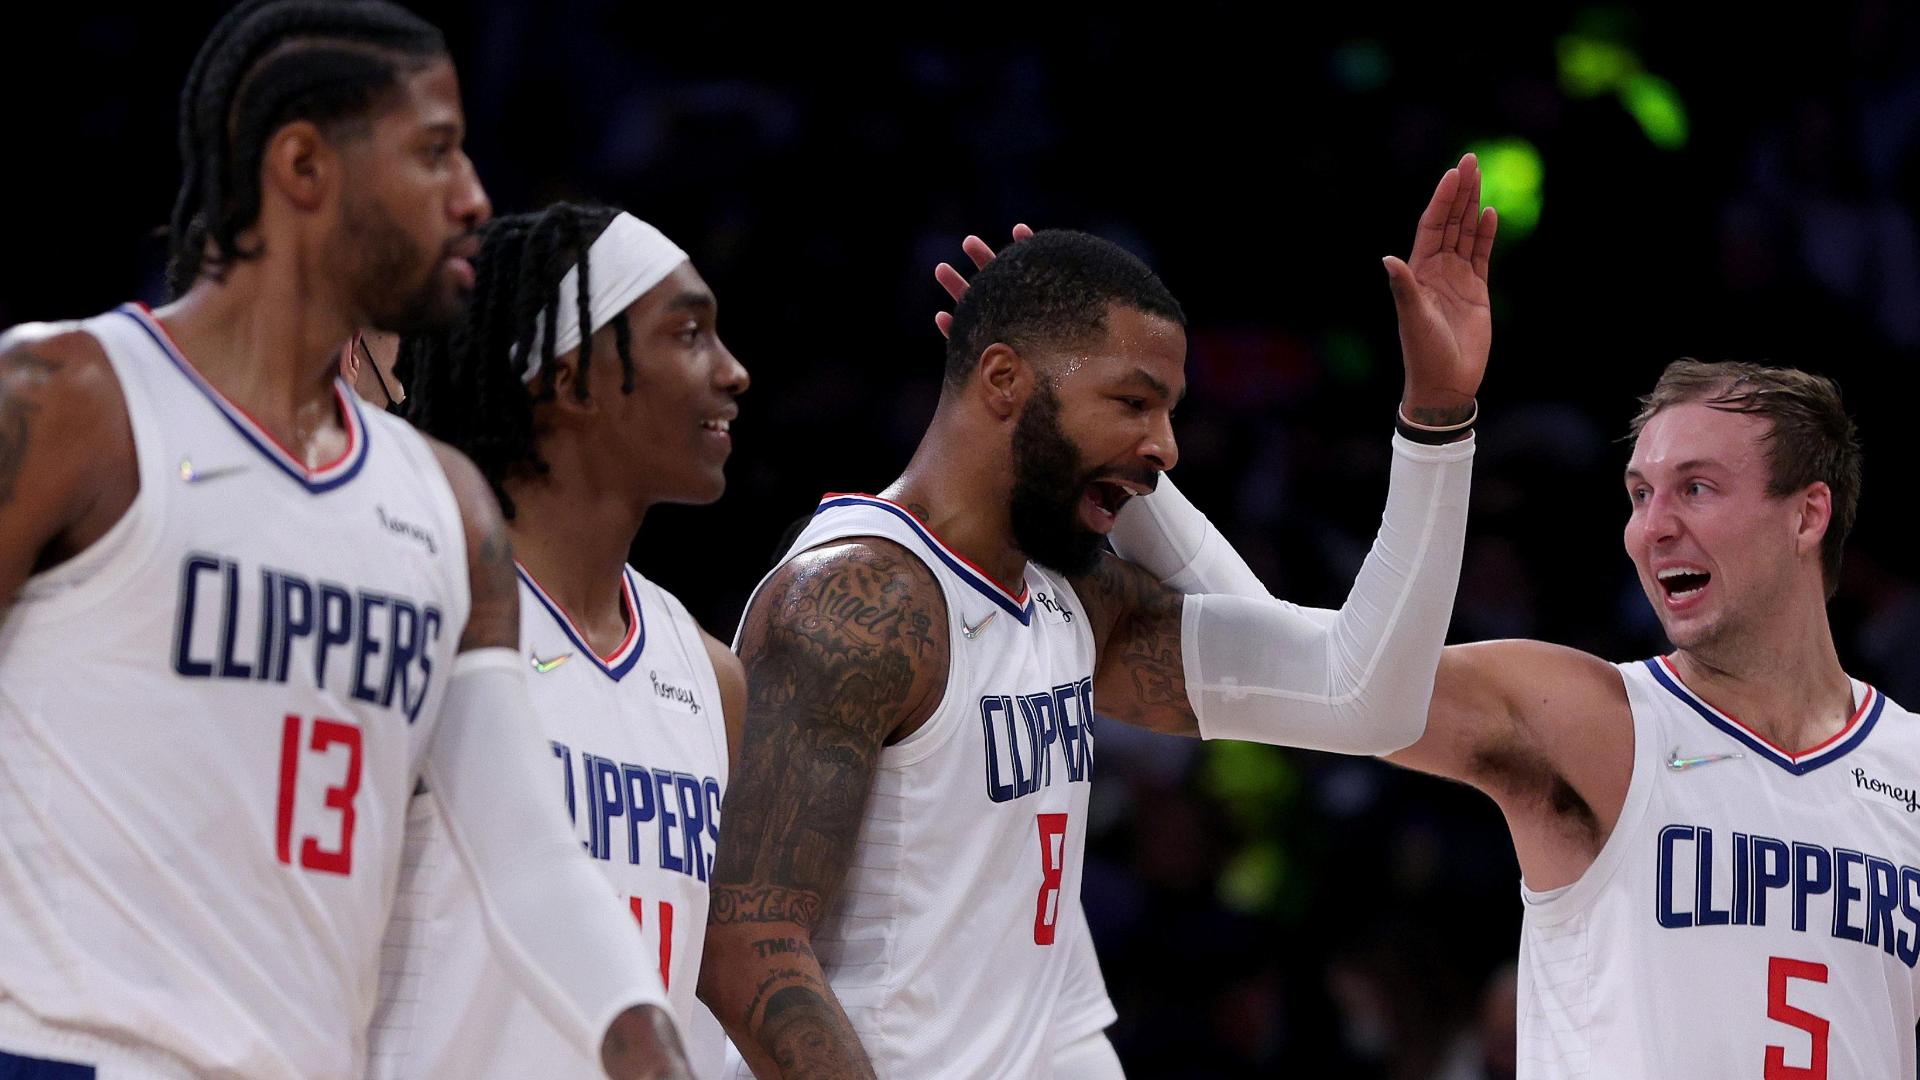 Morris banks in 3-pointer to secure Clippers' win